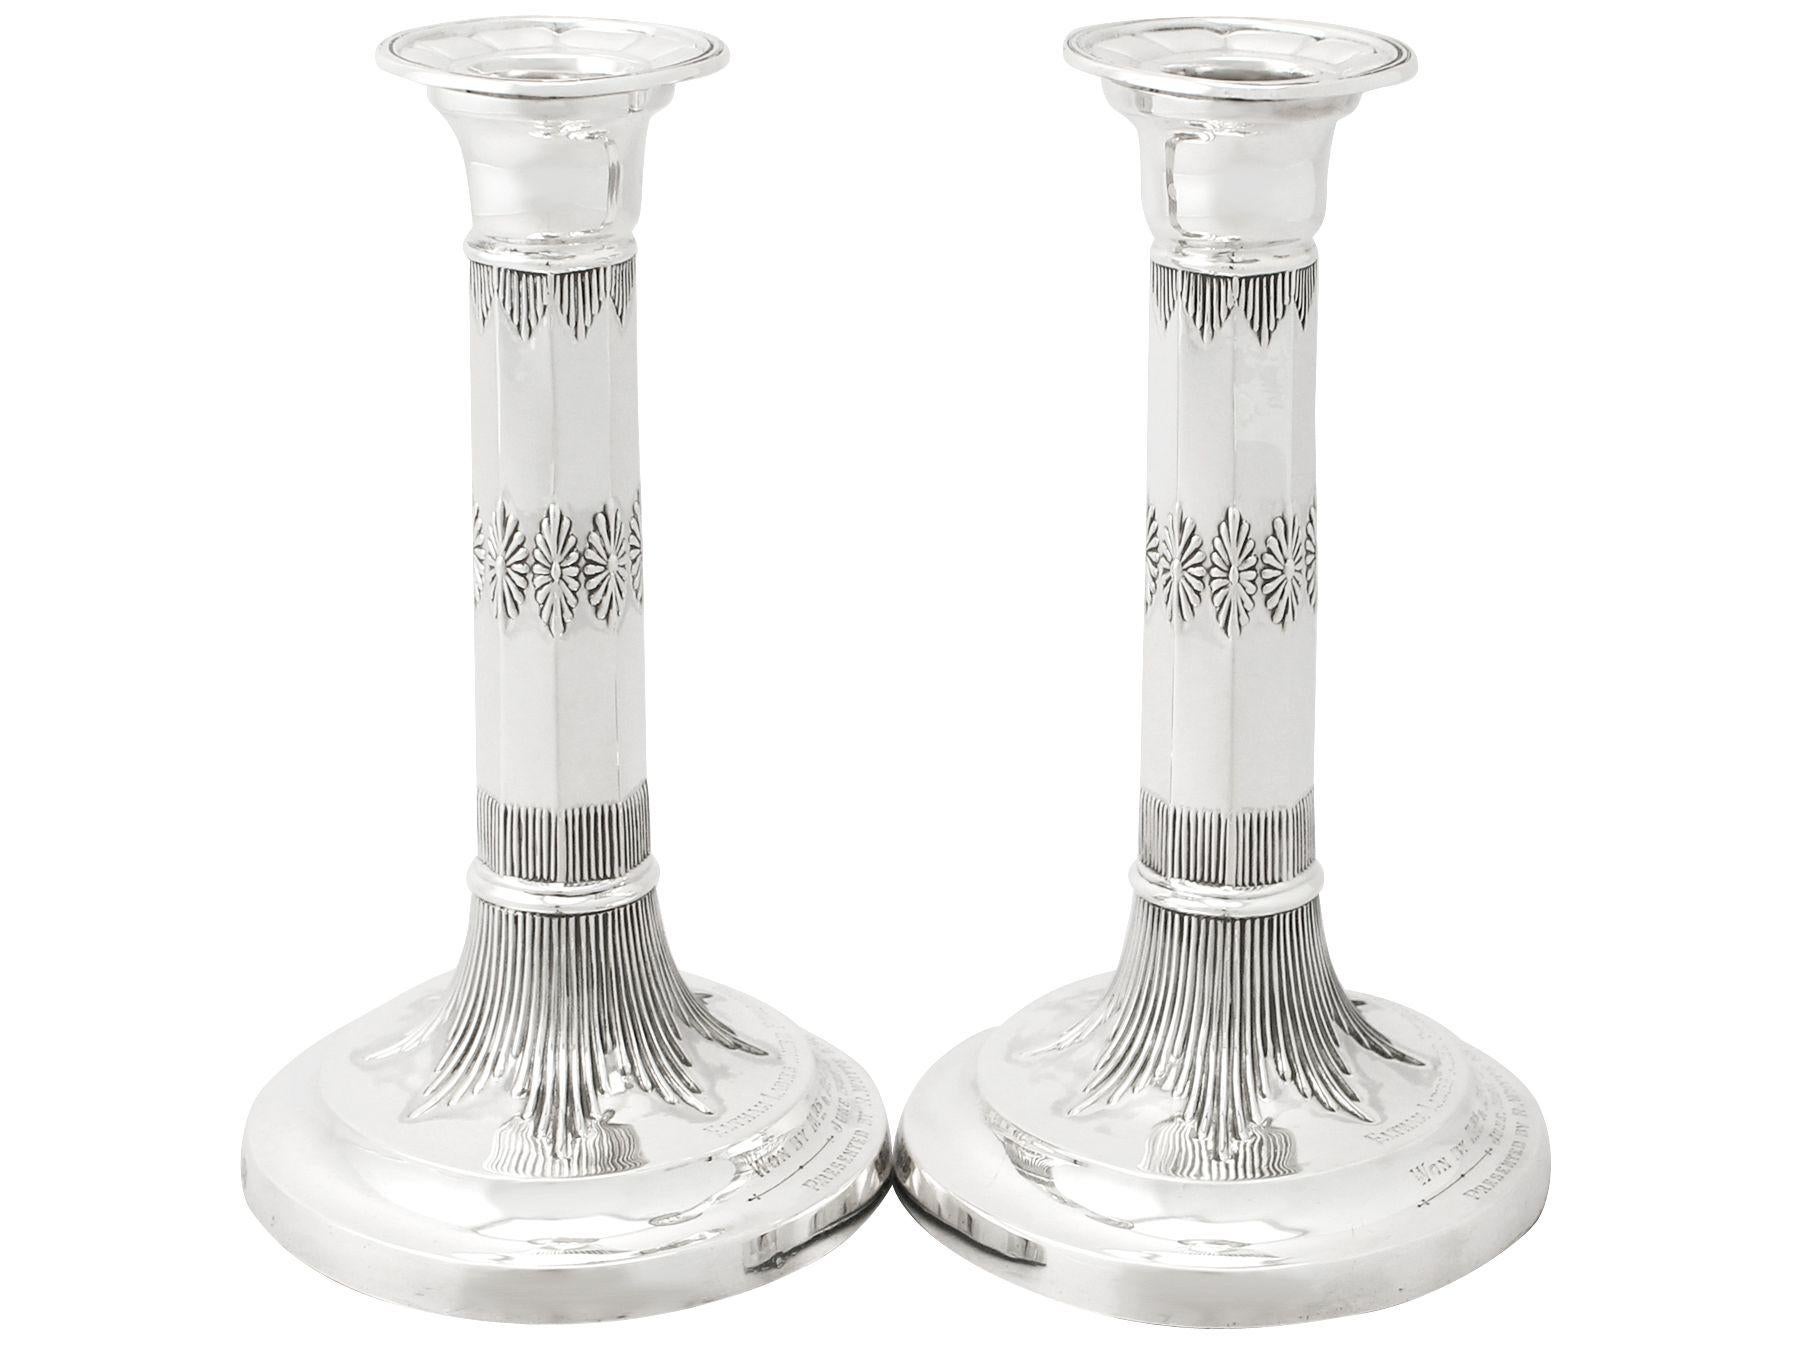 Antique Edwardian English Sterling Silver Candlesticks In Excellent Condition For Sale In Jesmond, Newcastle Upon Tyne